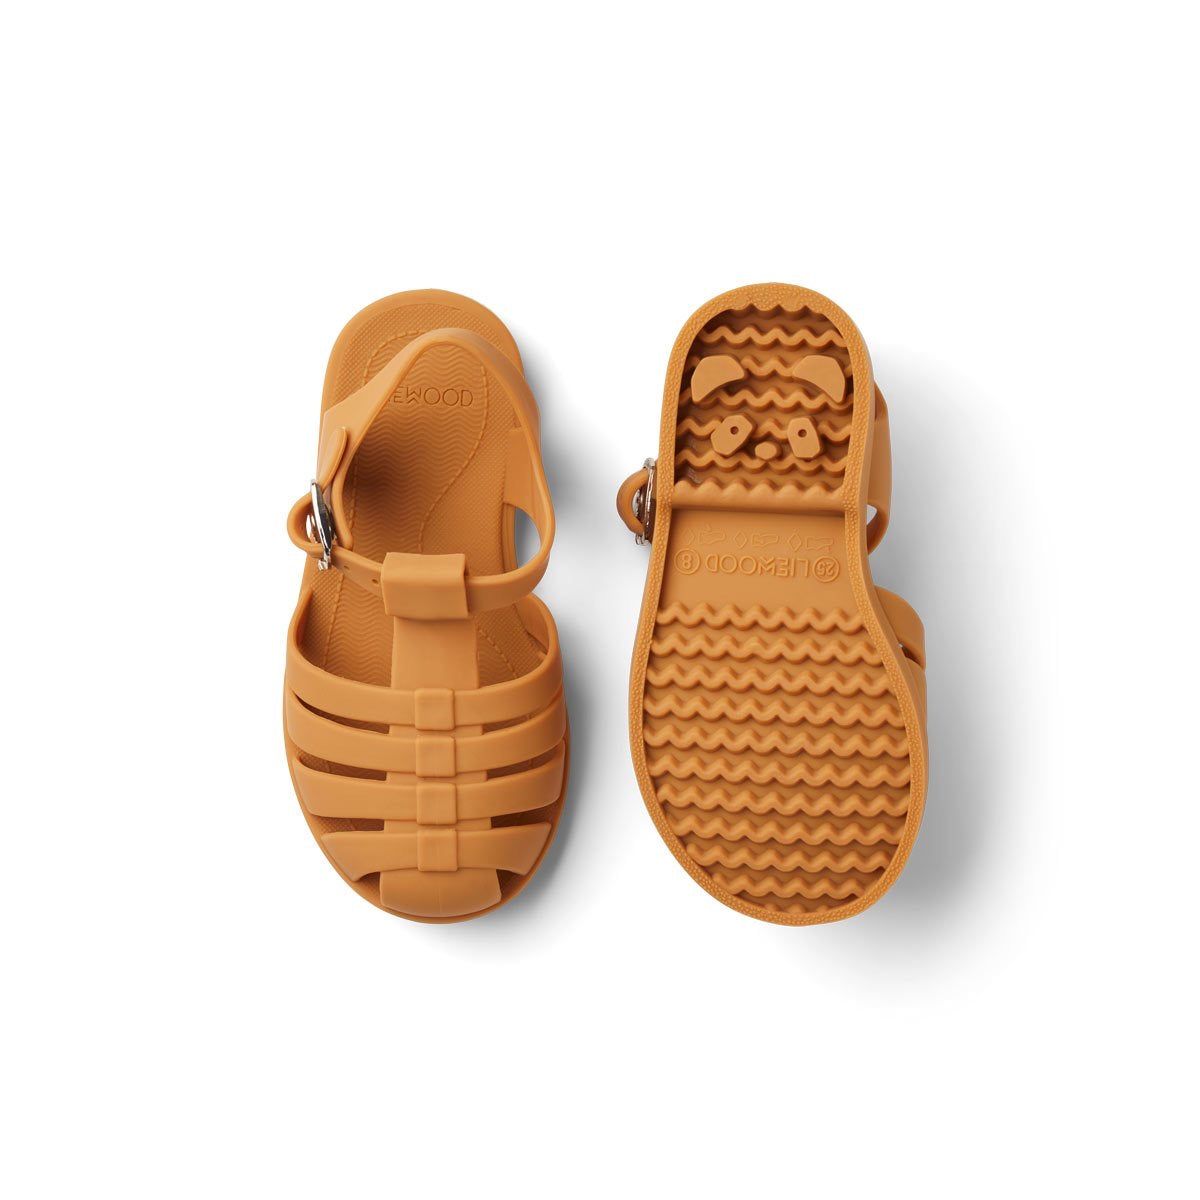 Alf & Co is a Nottinghamshire based childrens store and they are stockist of the Liewood Kids Bre Sandals in Mustard 